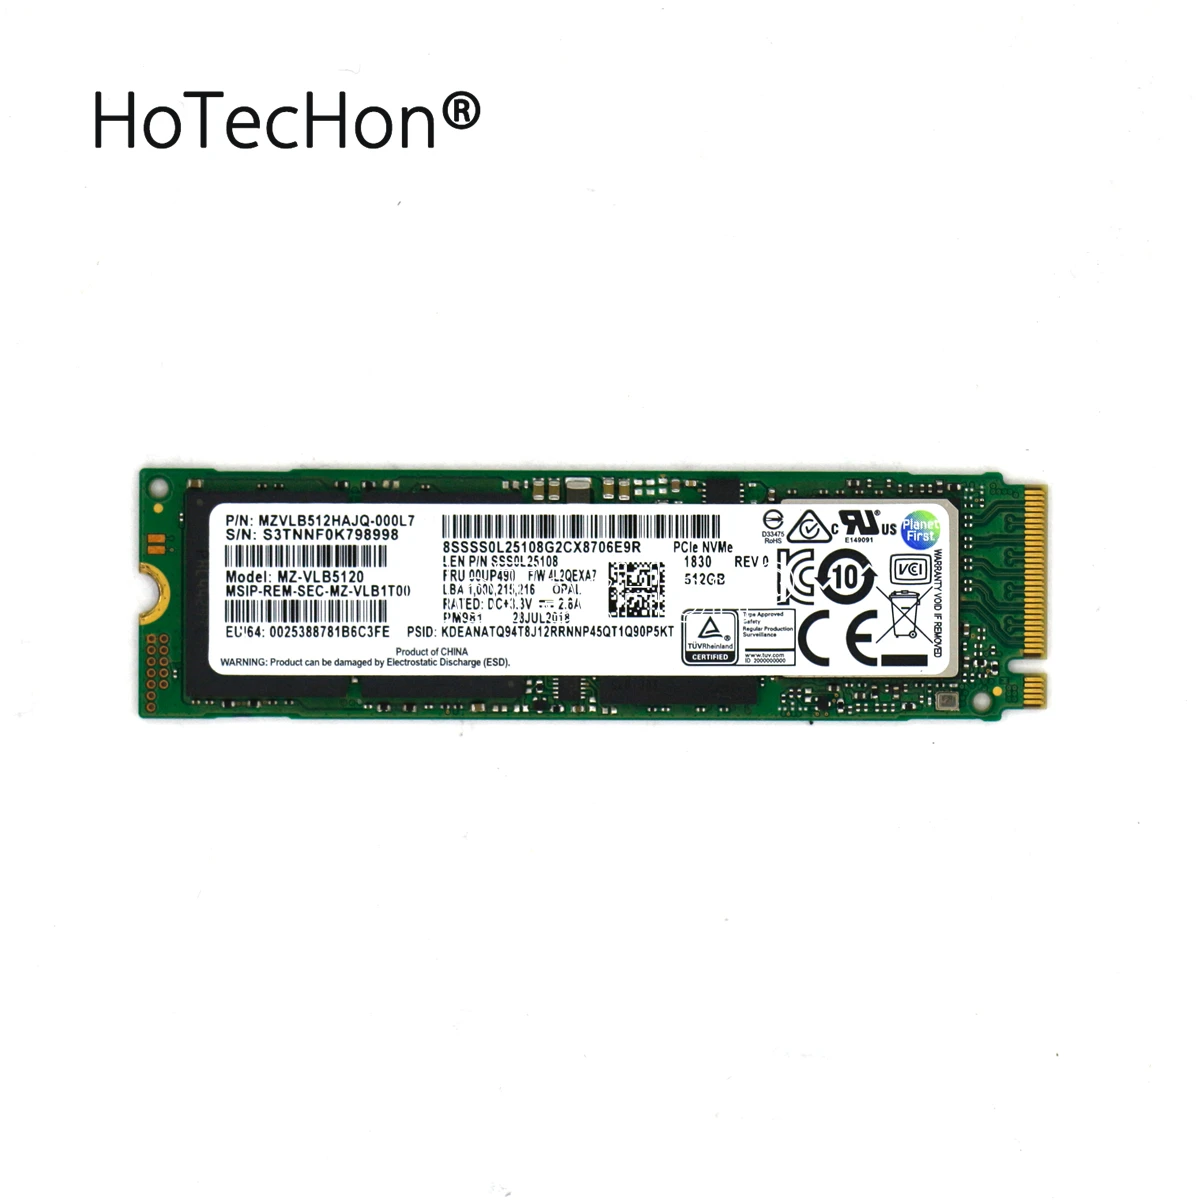 

SSS0L25108 - Genuine NVMe 512GB M.2 PCIe 3x4 2280 SSD Solid State Drive MZ-VLB5120 00UP490 for Lenovo